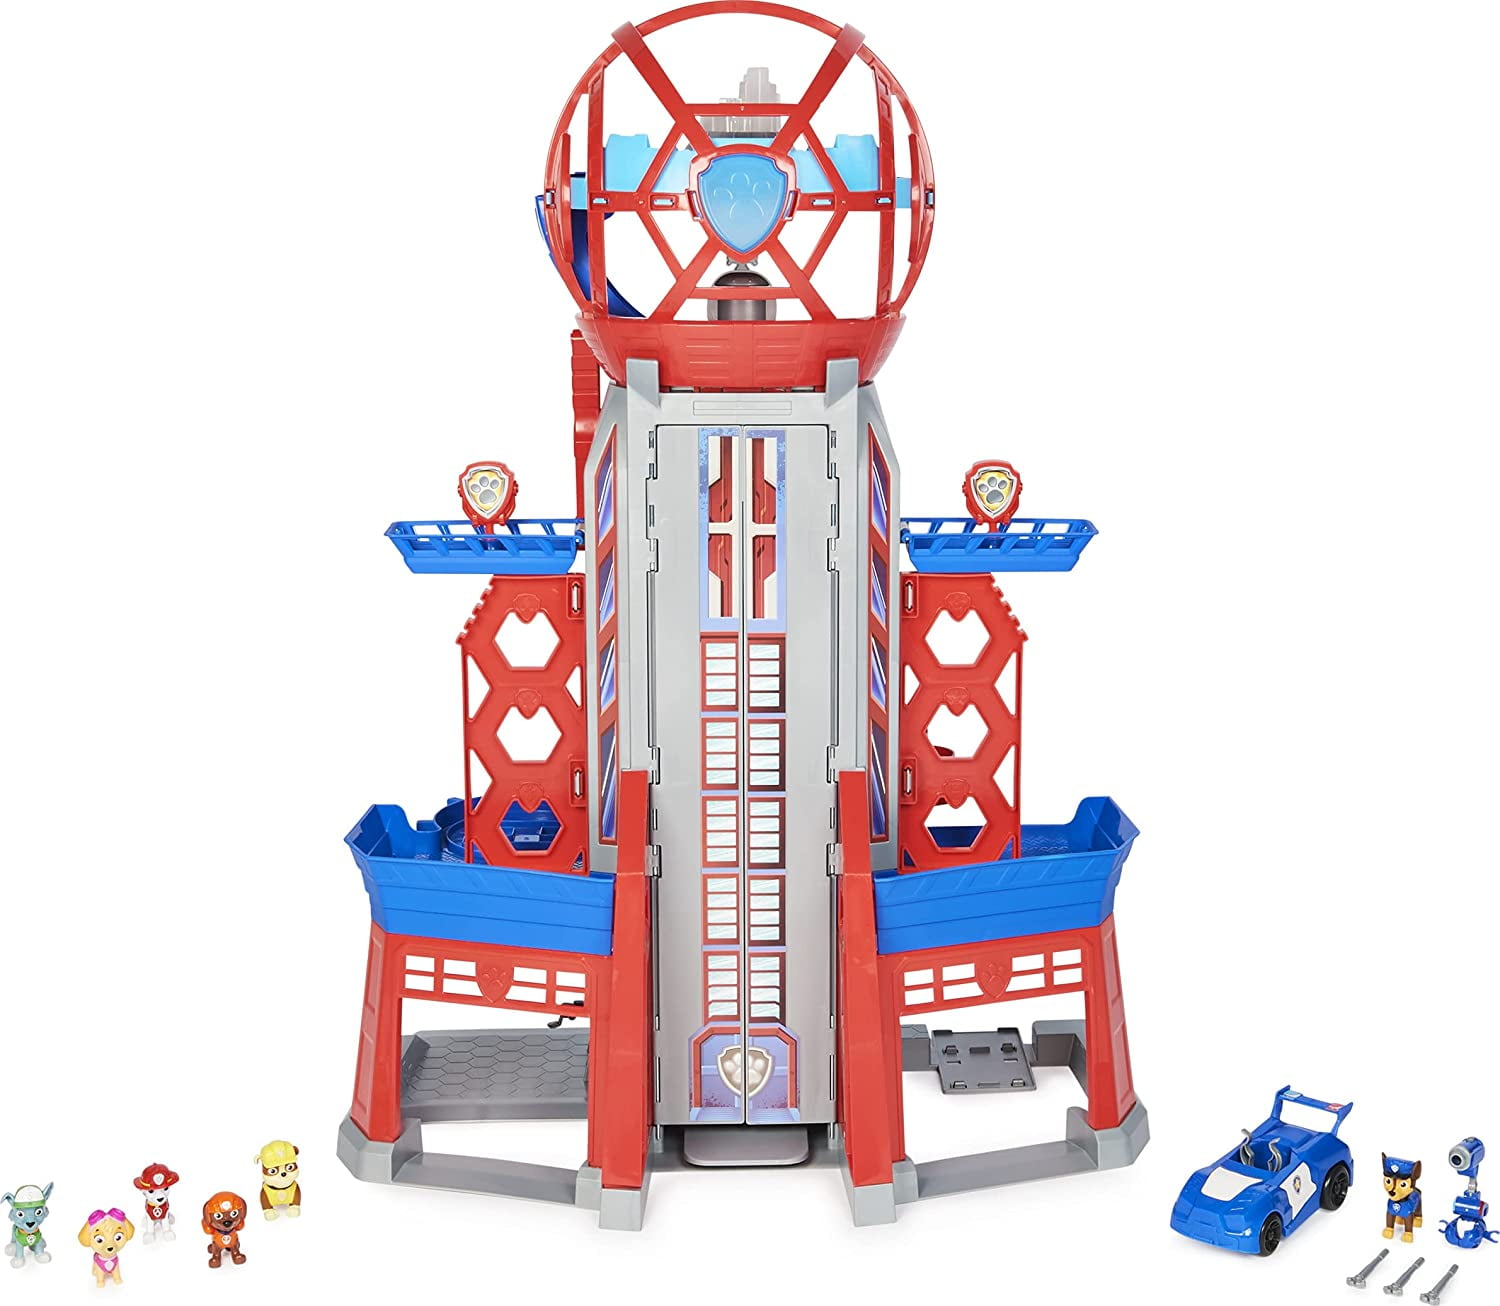 Paw Patrol, Movie Ultimate City 3ft. Tall Tower with 6 Action Figures, Toy Car, Lights Sounds, Kids Toys for Ages 3 and up - Walmart.com